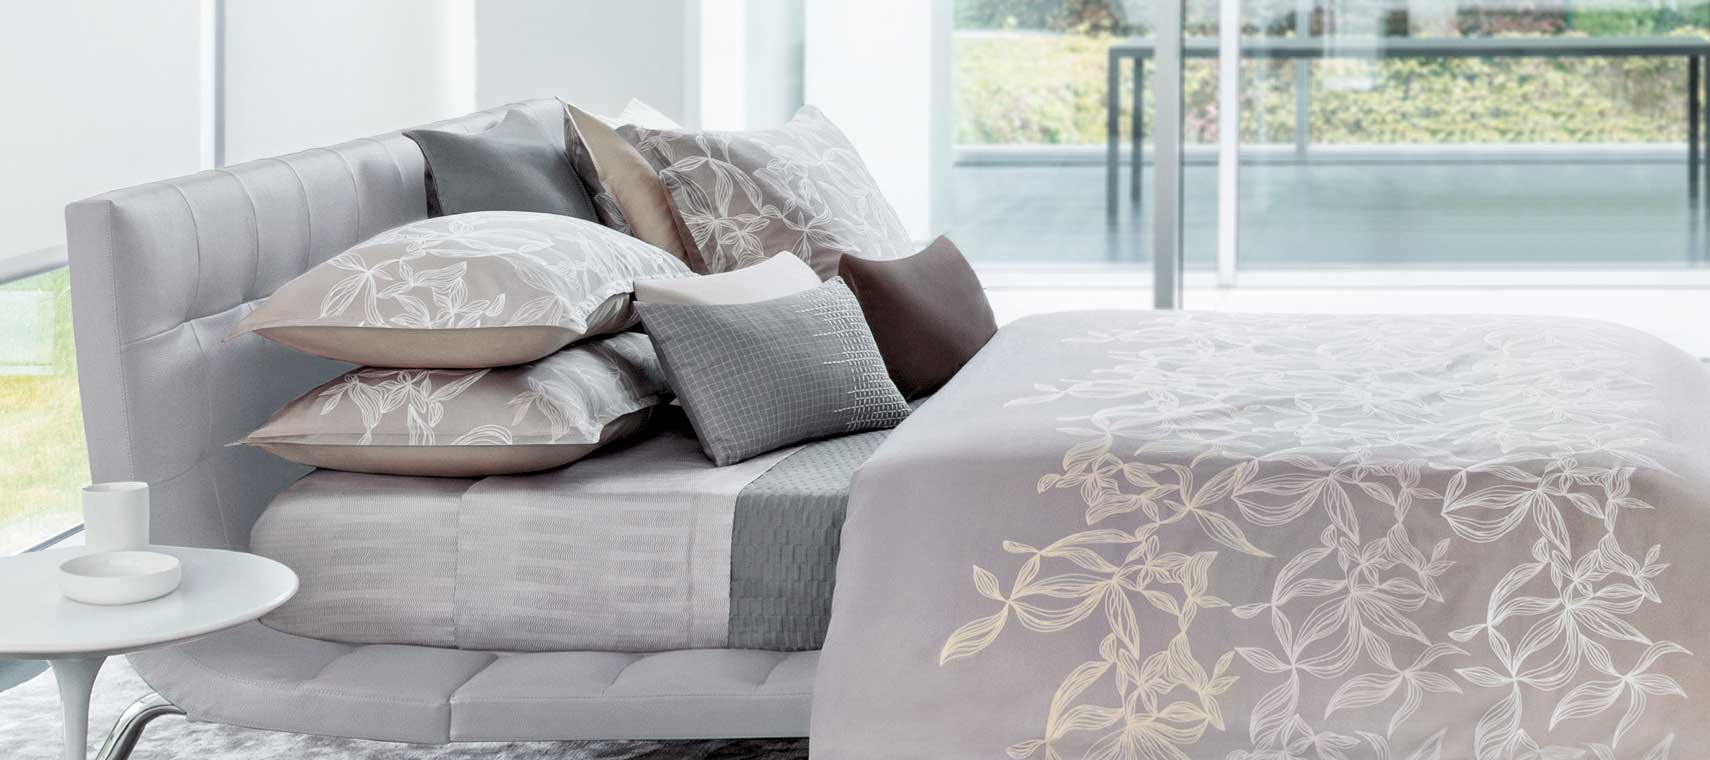 One of the main raw materials used by bed linen manufacturers is cotton